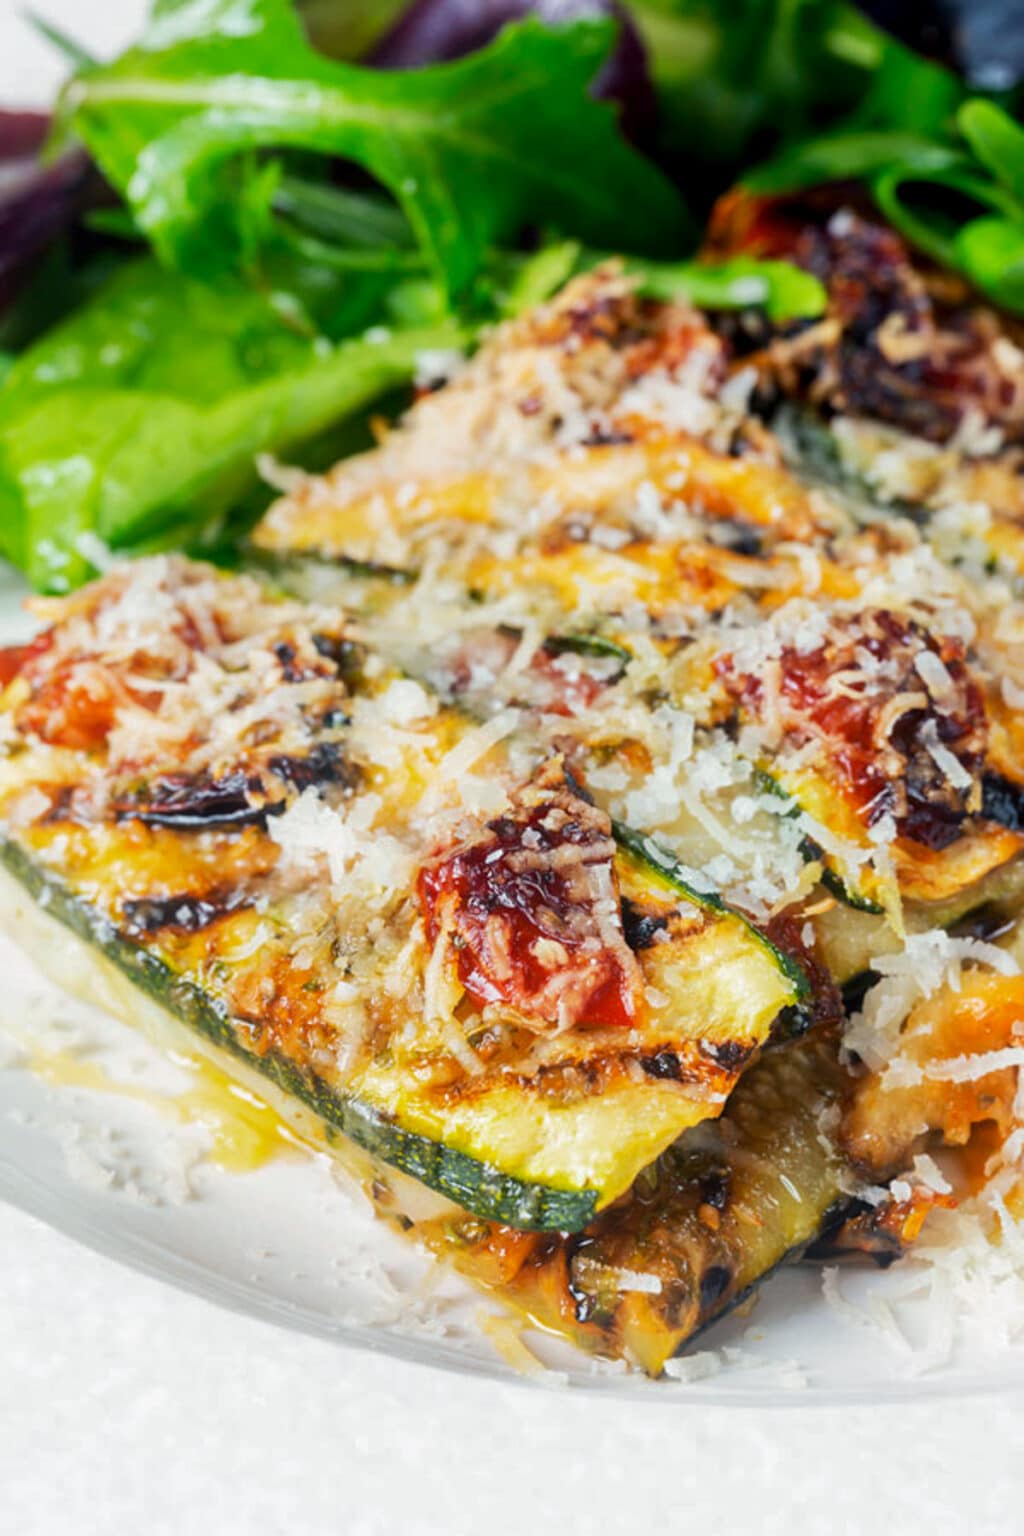 Grilled Zucchini and Tomato Cheese Bake